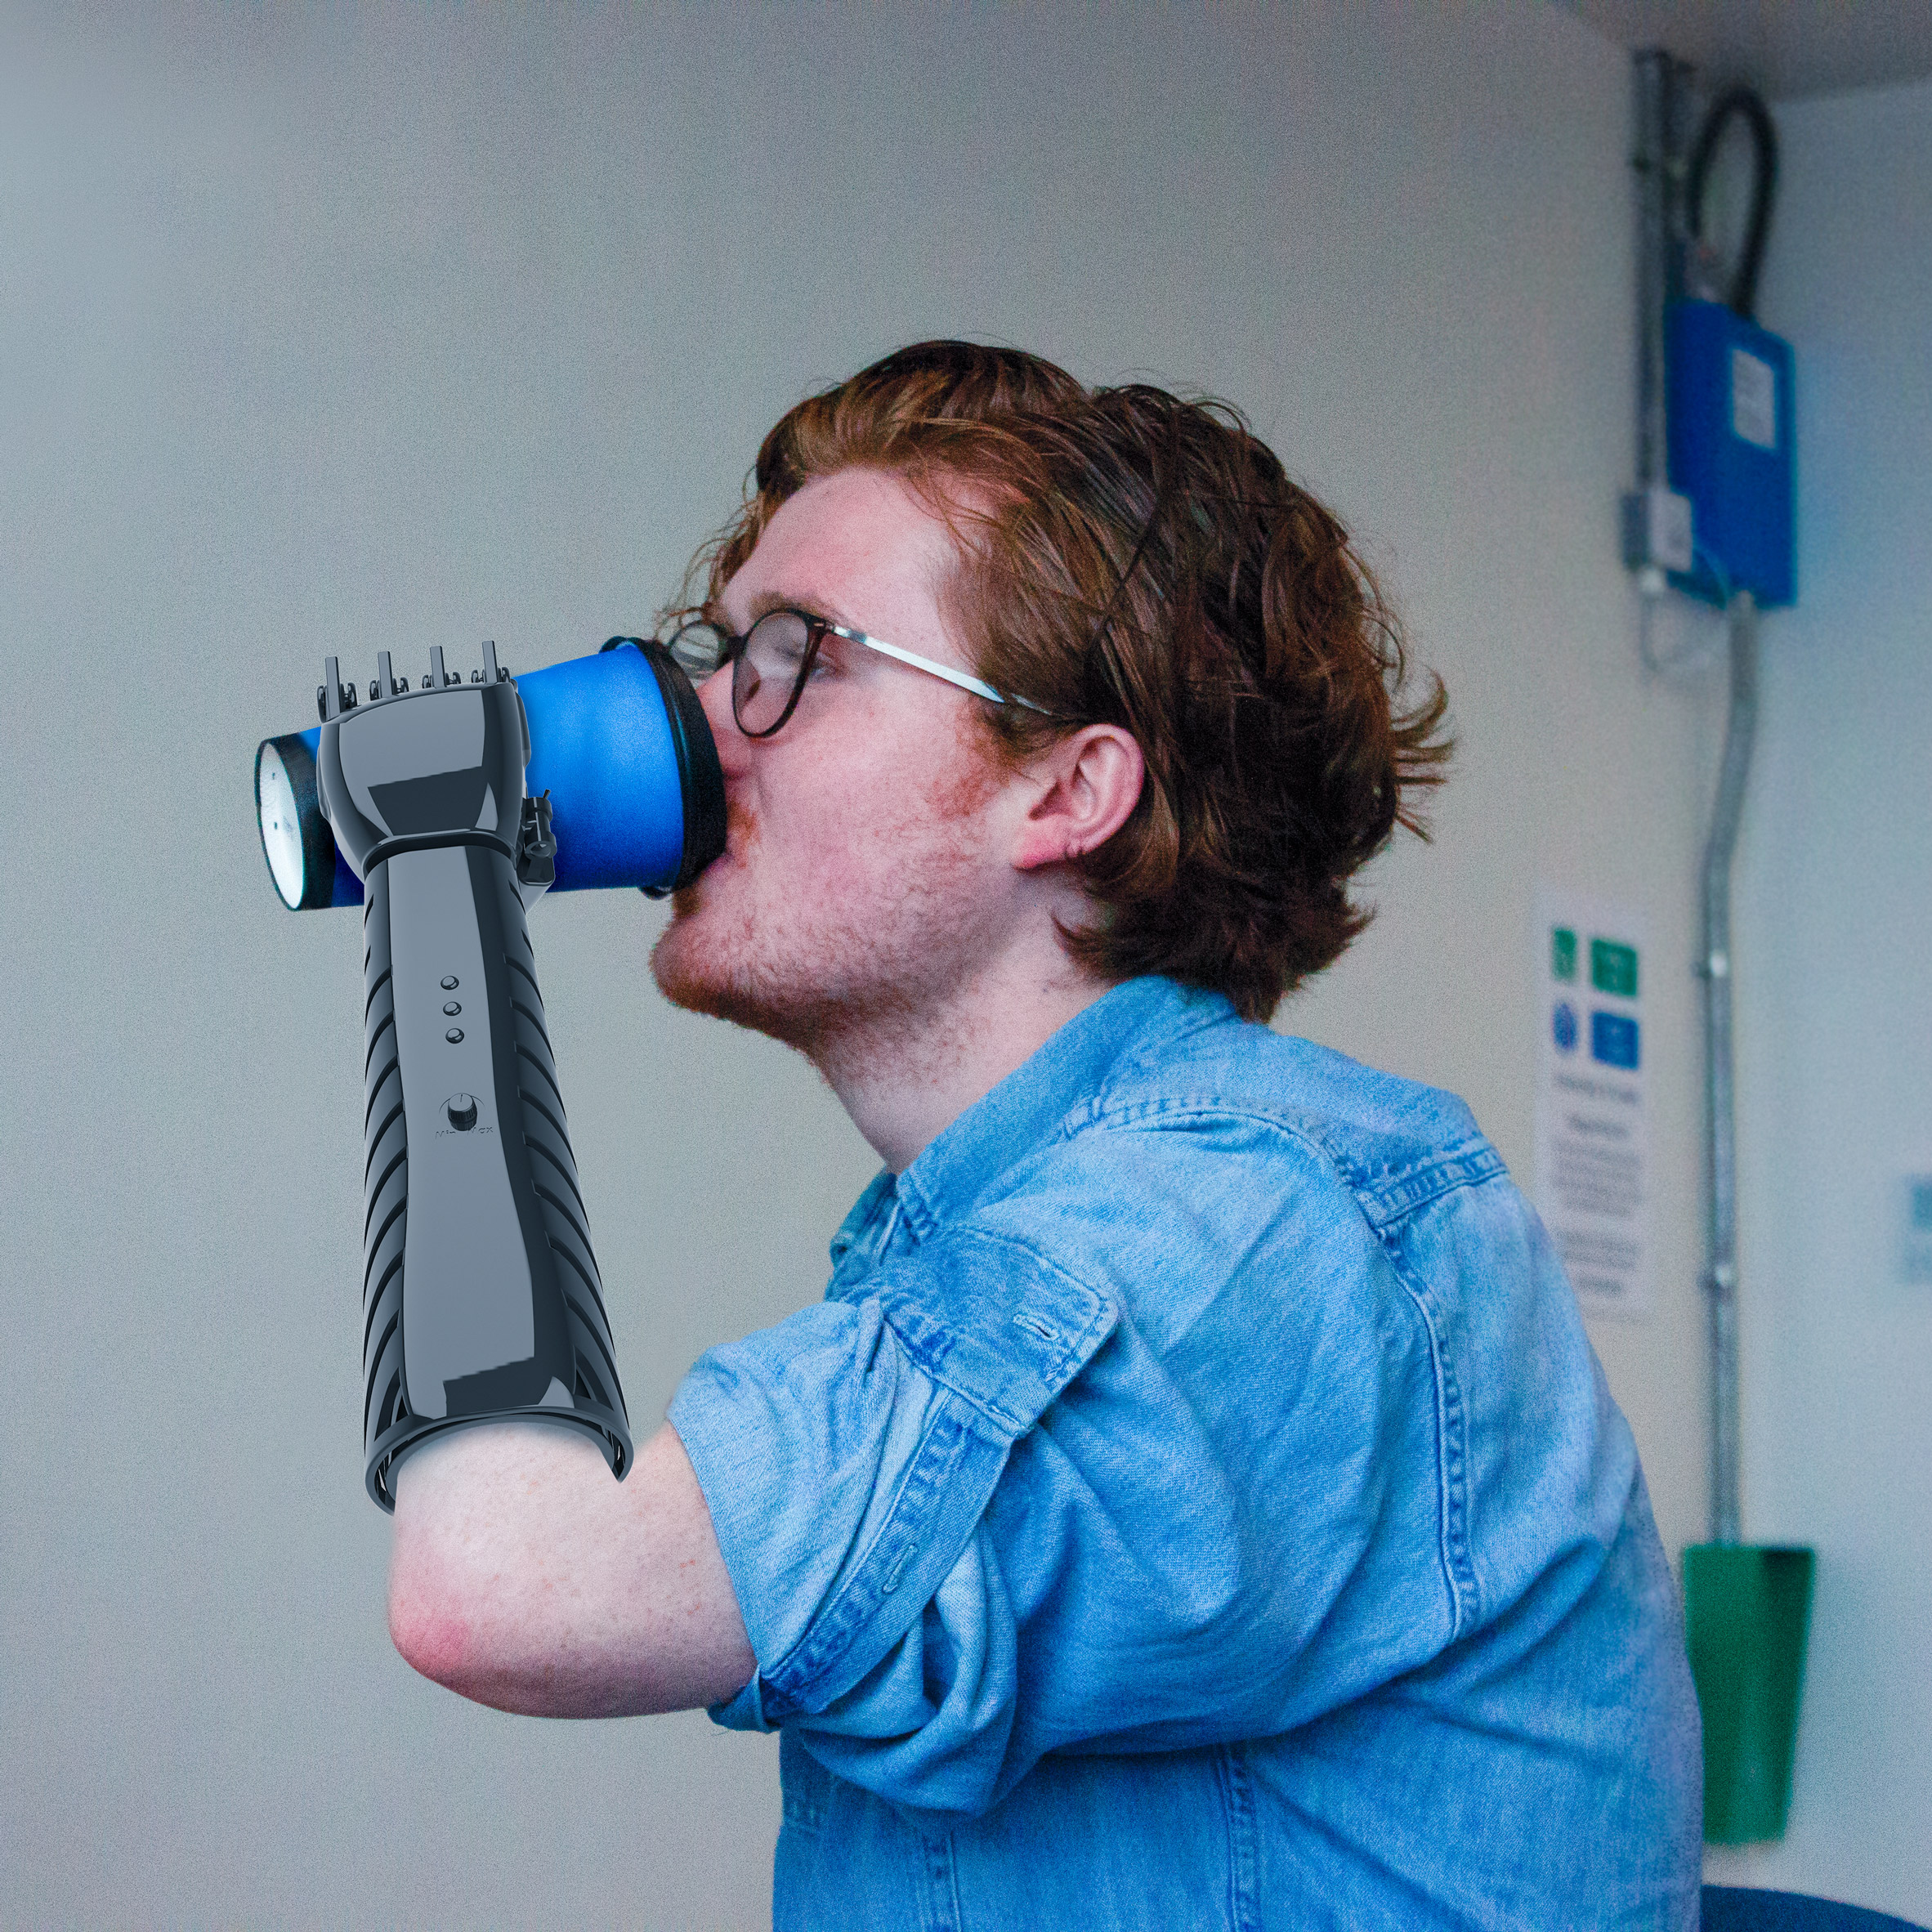 Lorenzo Spreafico's 3D-printed prosthetic gives tactile feedback